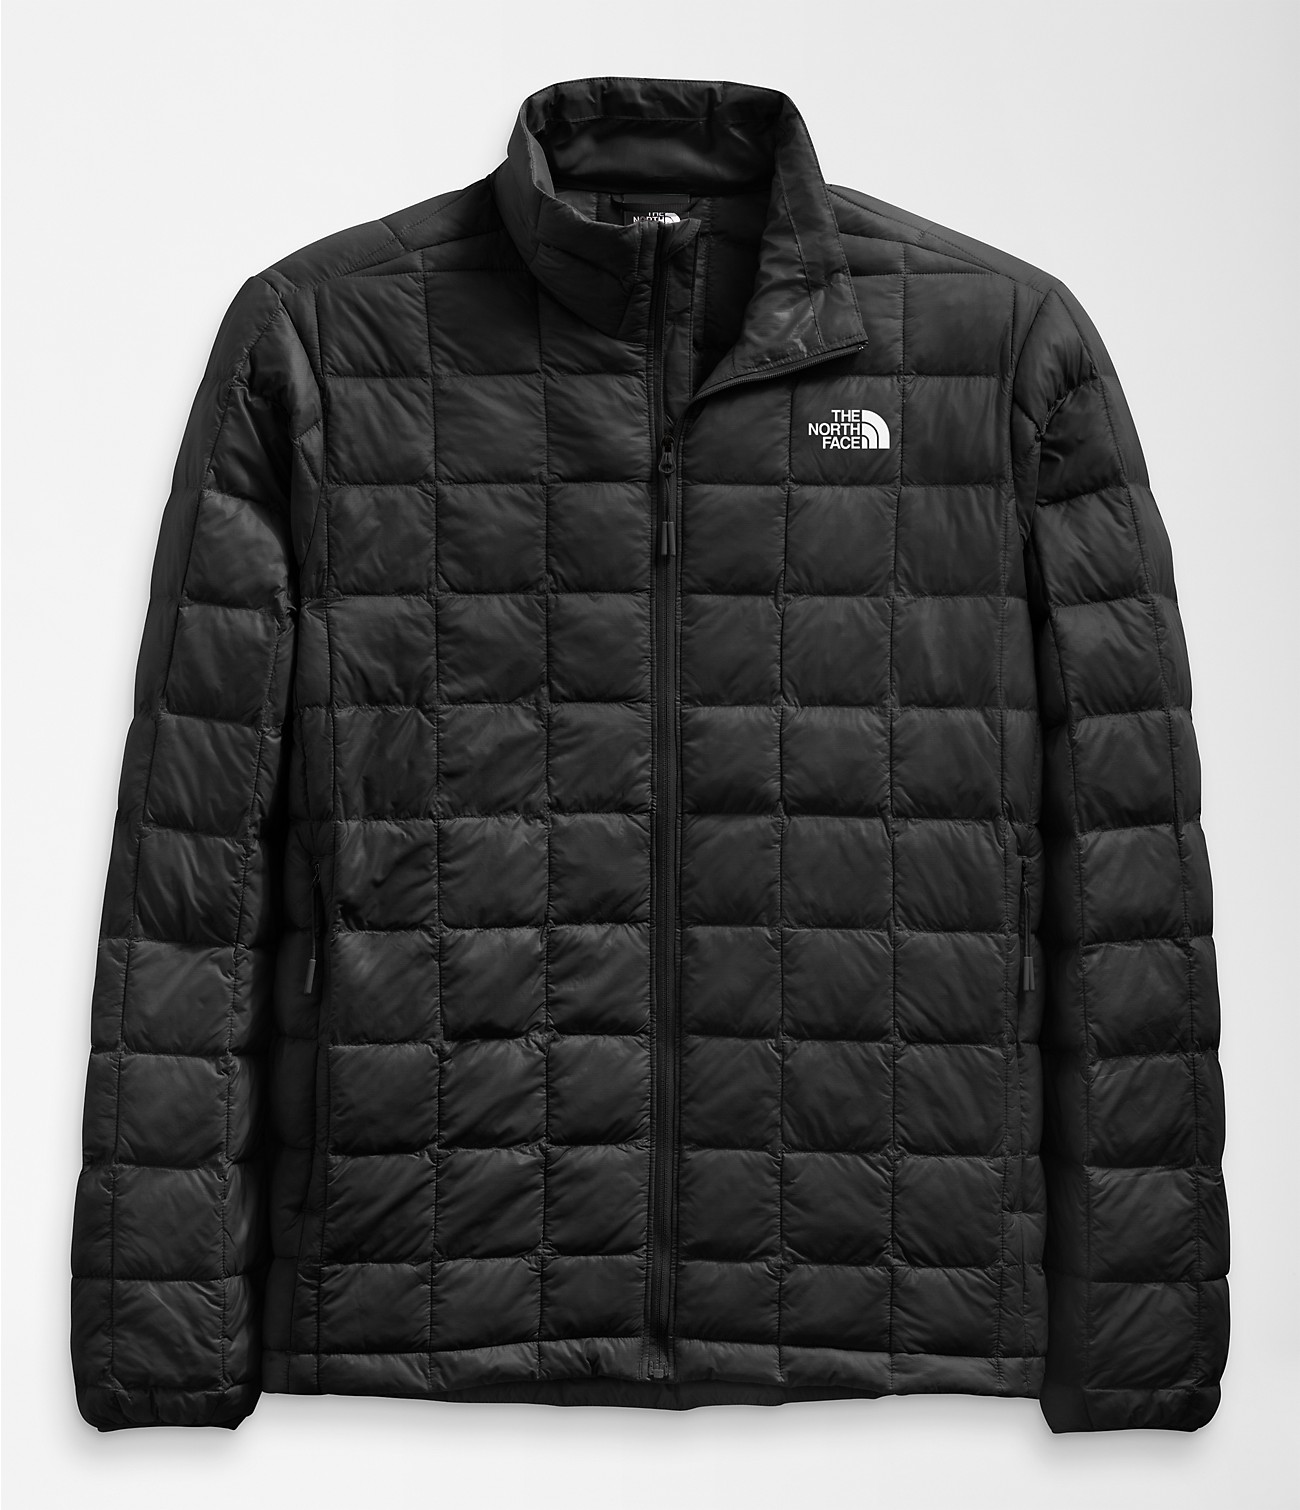 Unlock Wilderness' choice in the Columbia Vs North Face comparison, the ThermoBall™ Eco Jacket 2.0 by The North Face